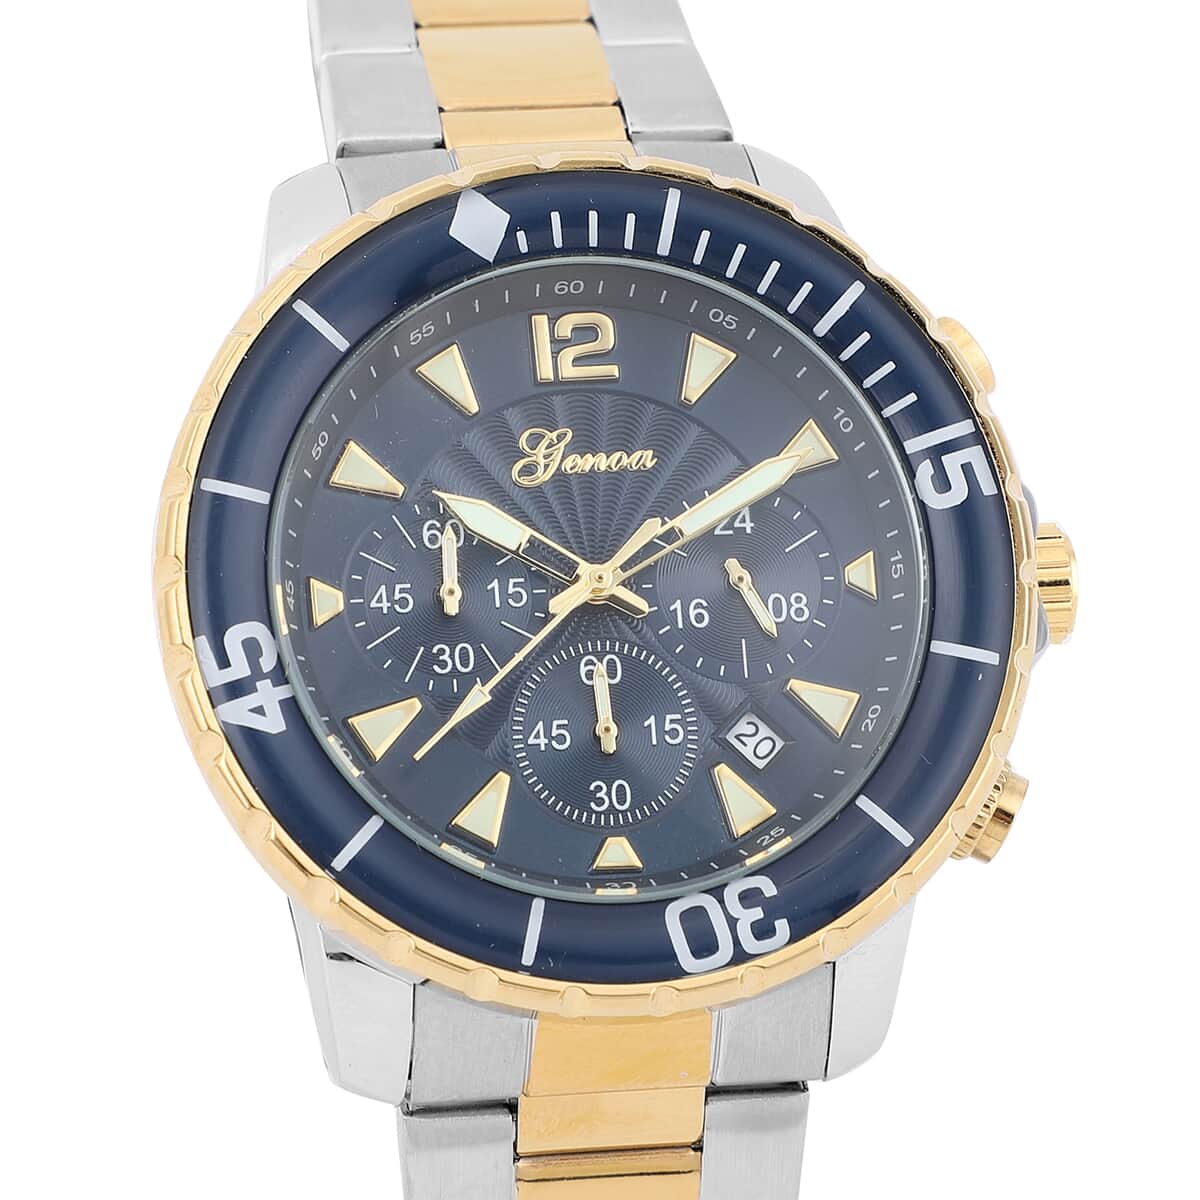 Genoa Multi-Functional Quartz Movement Watch with Blue Dial & Stainless Steel Strap (46 mm) image number 3